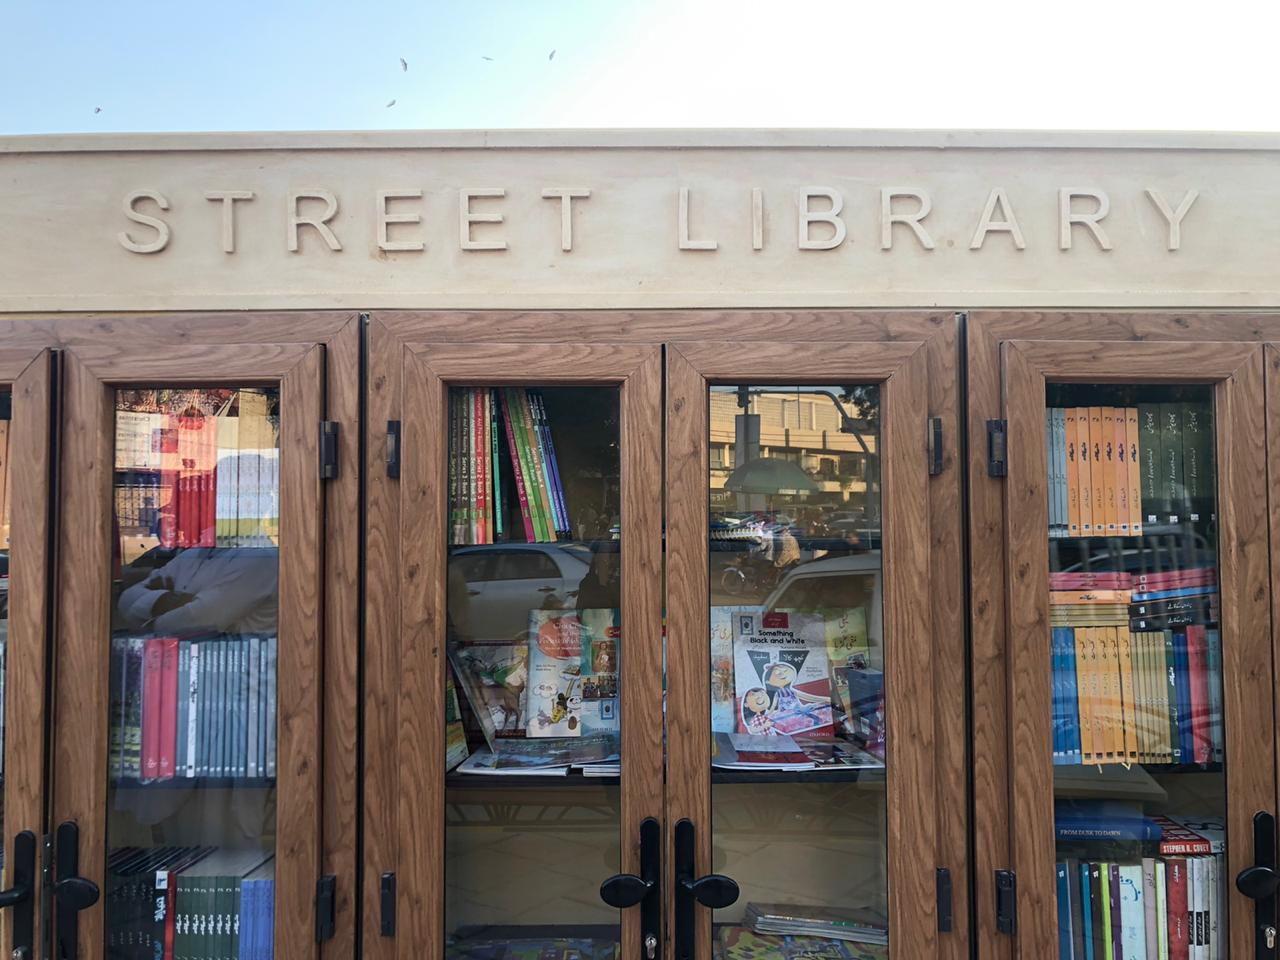 Pakistan’s first street library inaugurated in Karachi on QeA’s birthday